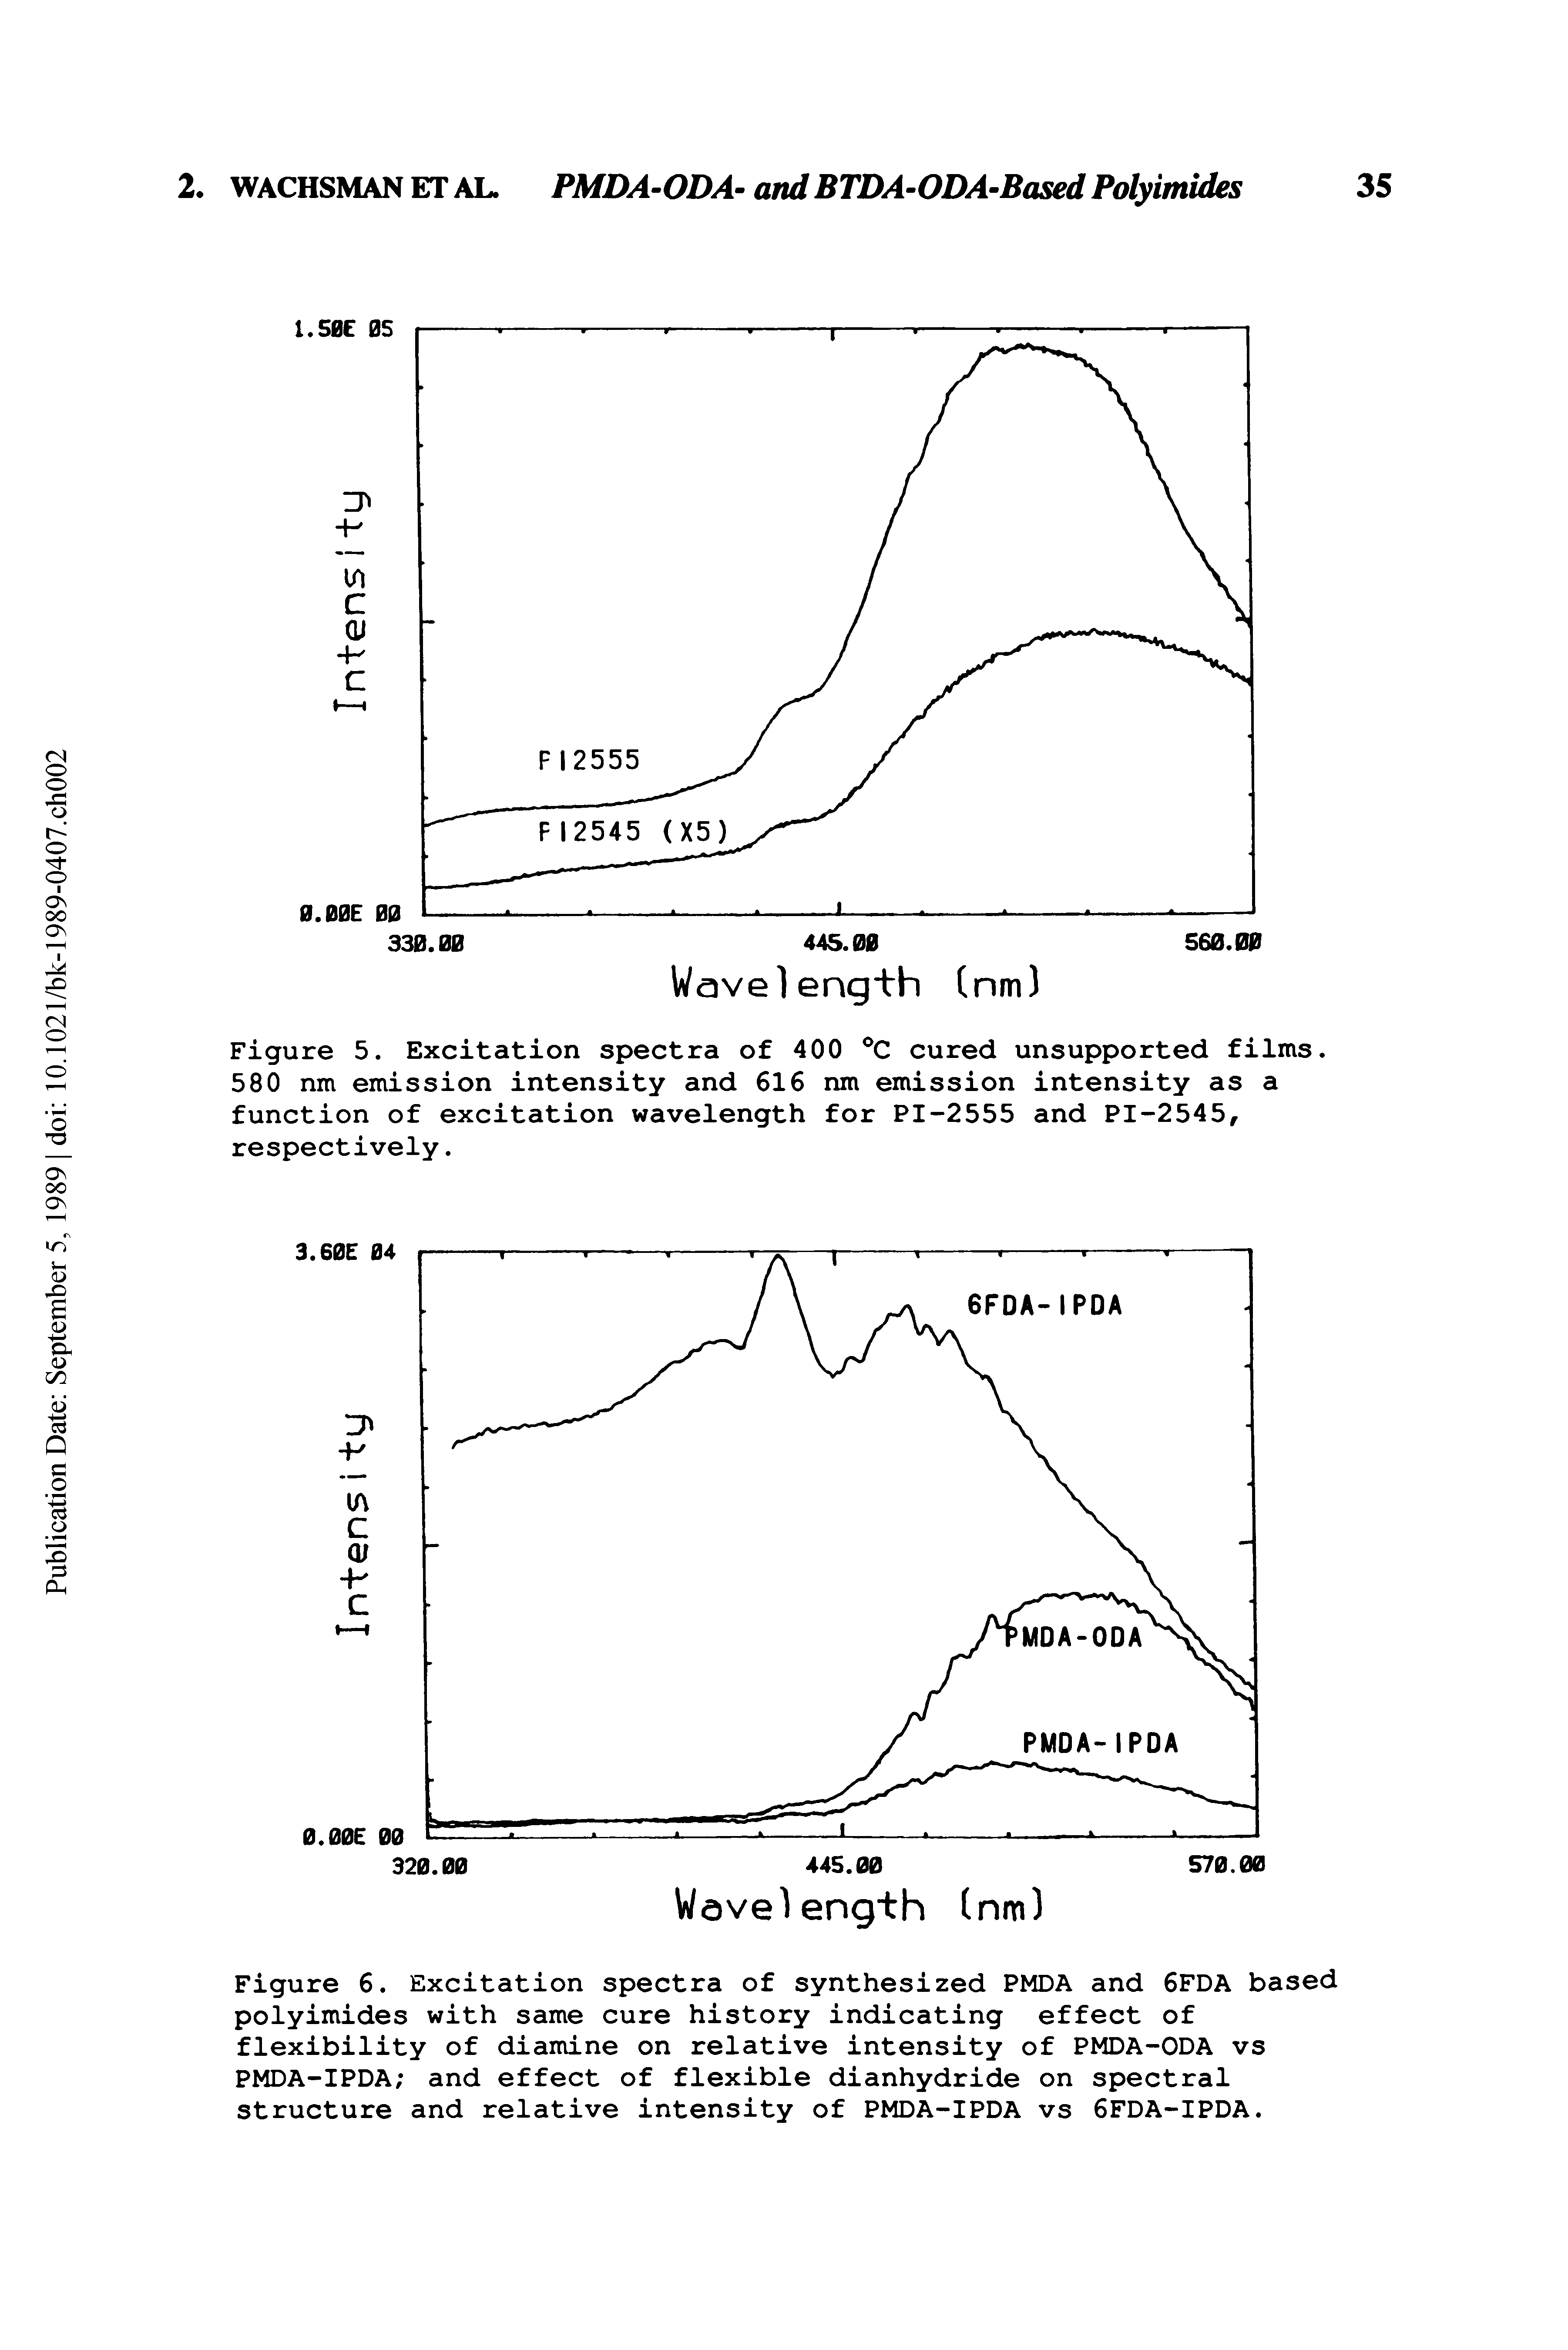 Figure 6. Excitation spectra of synthesized PMDA and 6FDA based polyimides with same cure history indicating effect of flexibility of diamine on relative intensity of PMDA-ODA vs PMDA-IPDA and effect of flexible dianhydride on spectral structure and relative intensity of PMDA-IPDA vs 6FDA-IPDA.